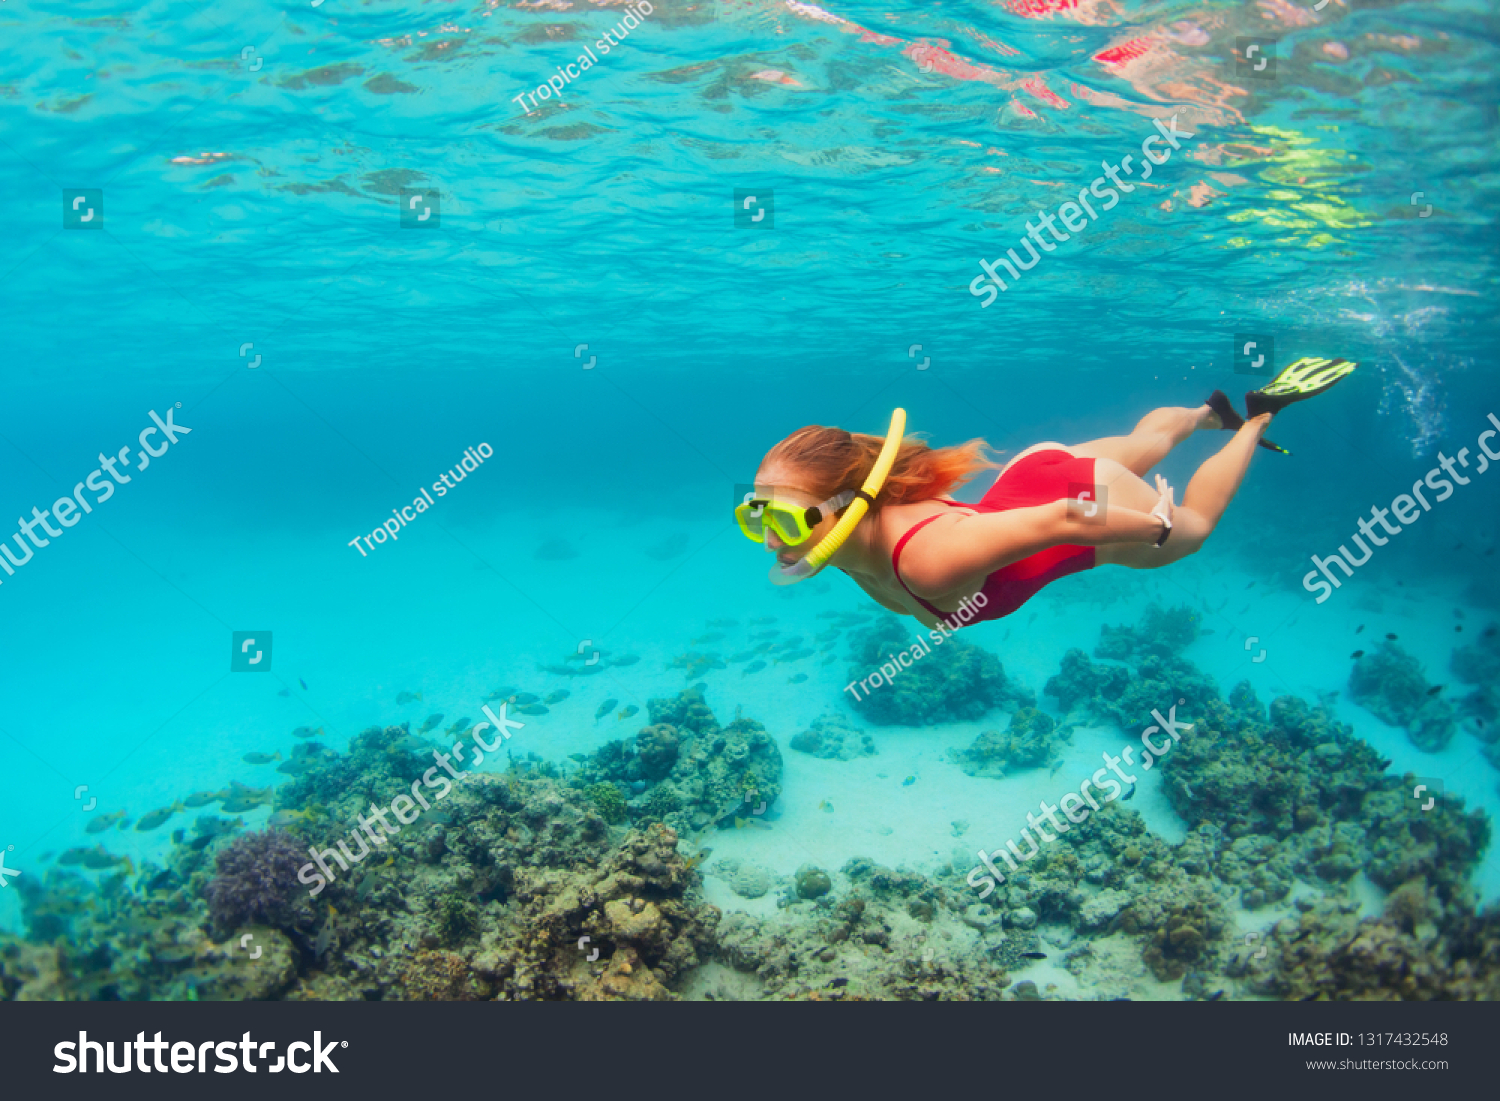 Young happy girl in snorkeling mask jump and dive underwater to see tropical fishes in coral reef sea pool. Travel activity, water sports, outdoor adventure, on family summer beach holiday with kids #1317432548